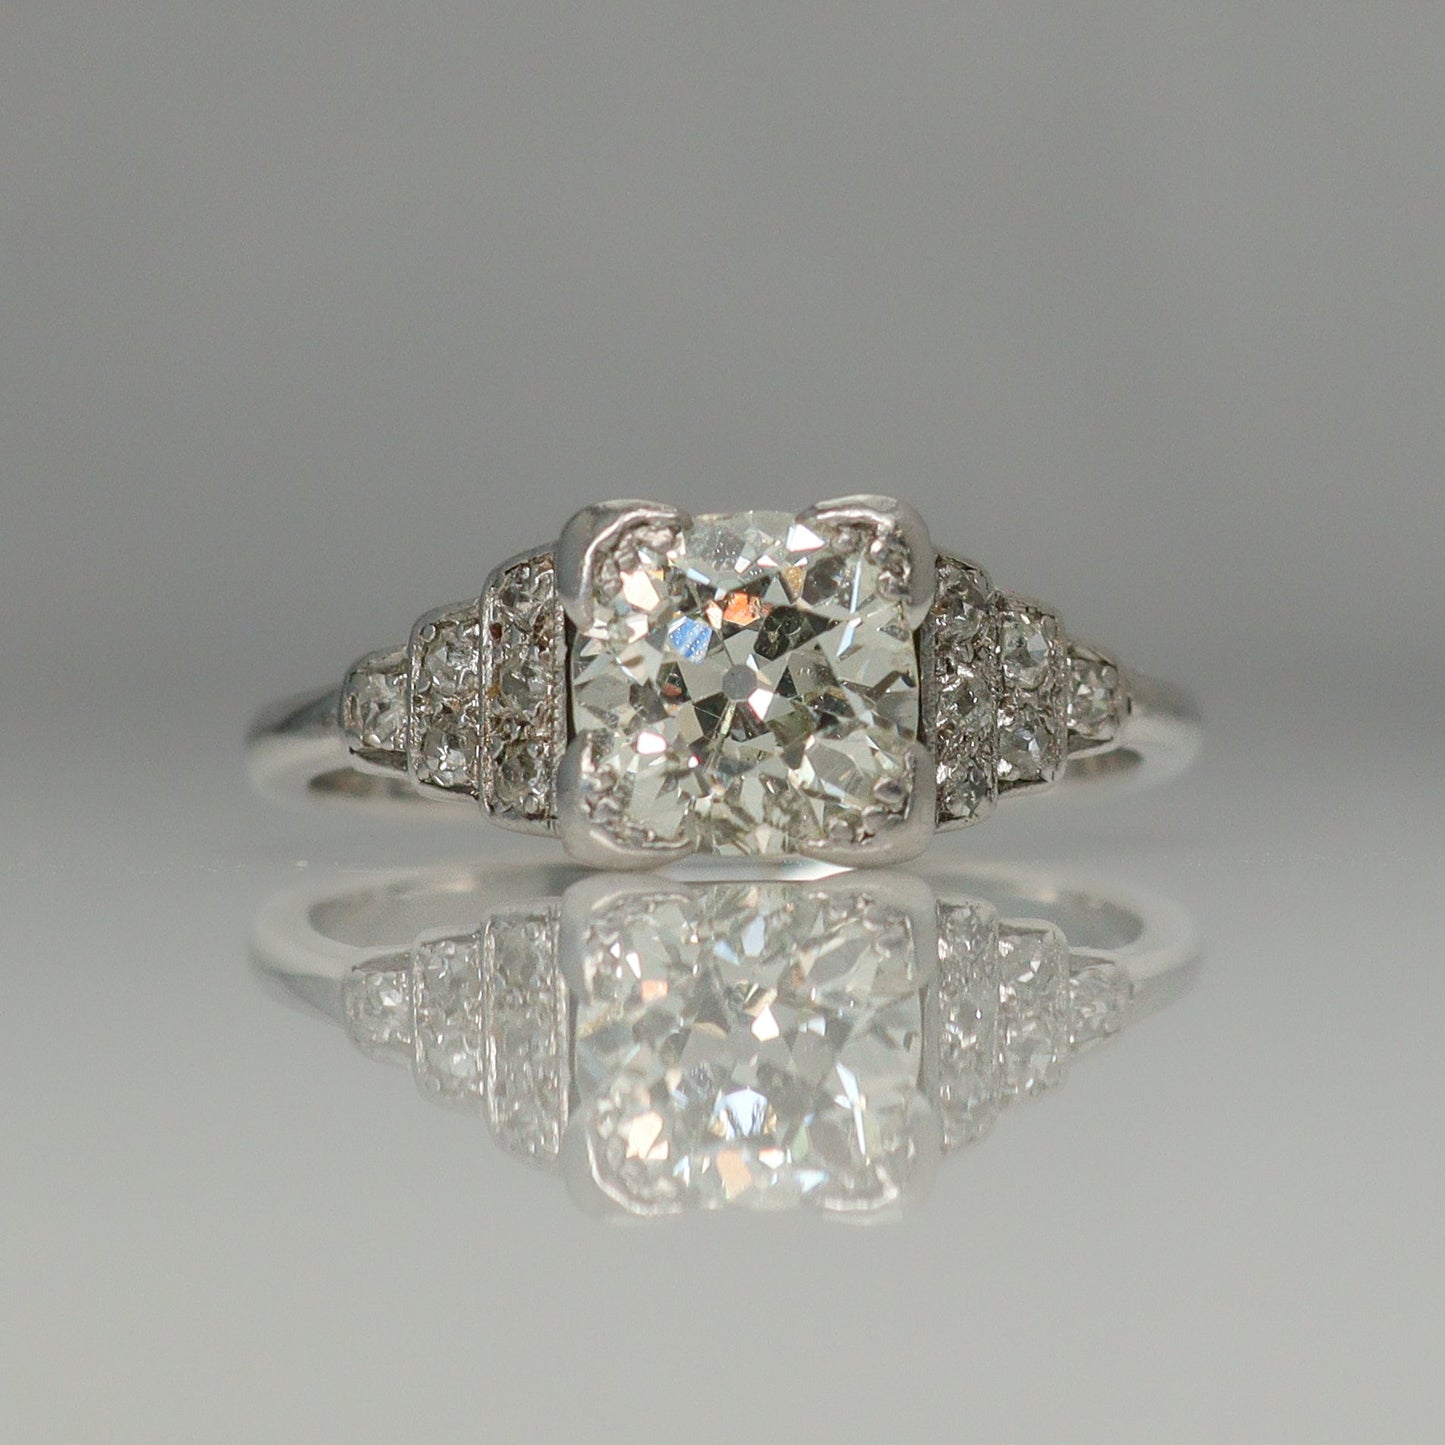 1.25 Carat Diamond Solitaire Ring - Friar House